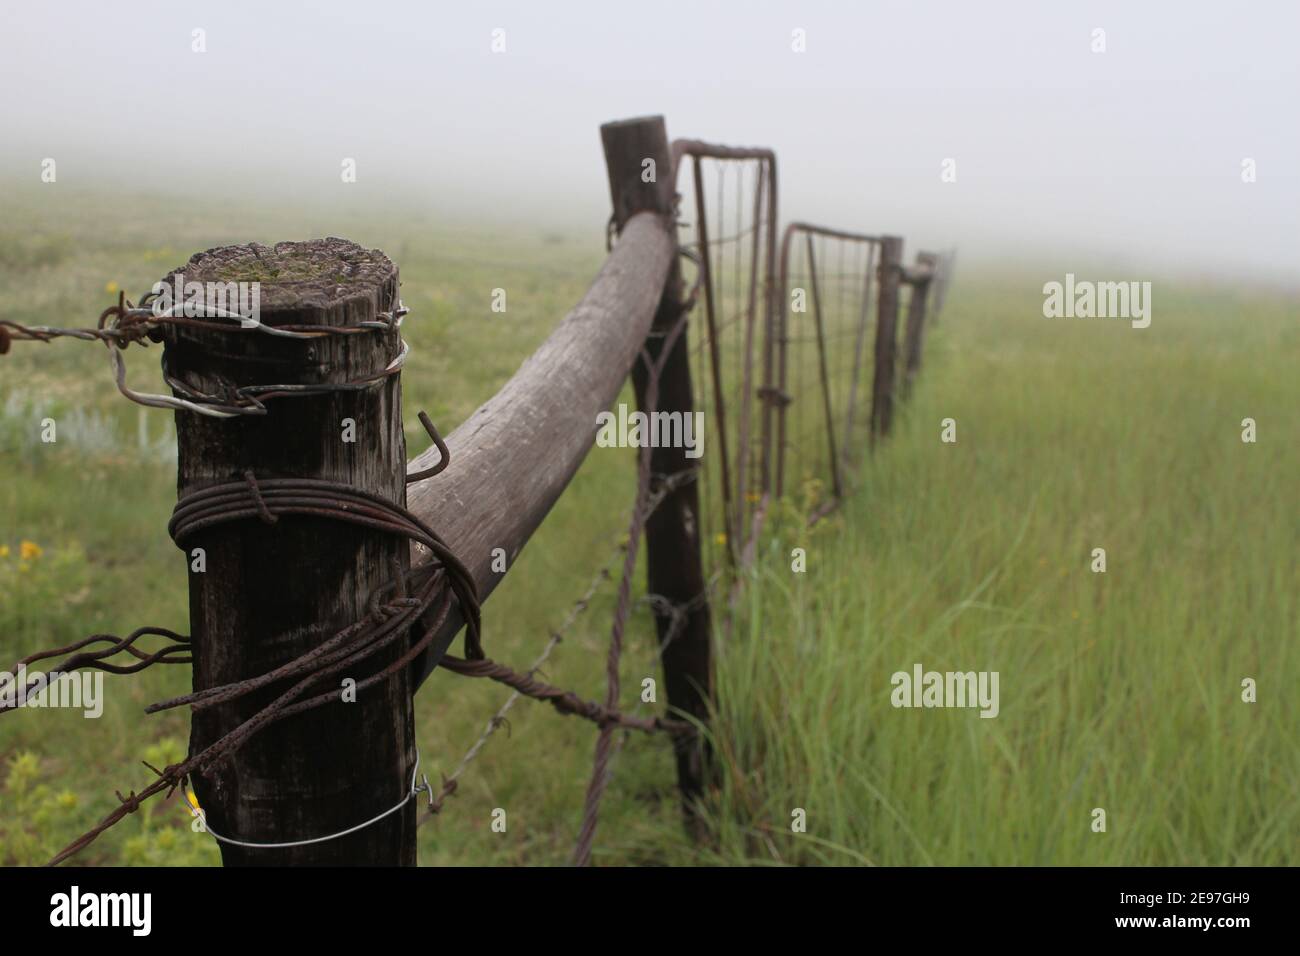 A rustic fence and gate on a farm in the mist. Stock Photo